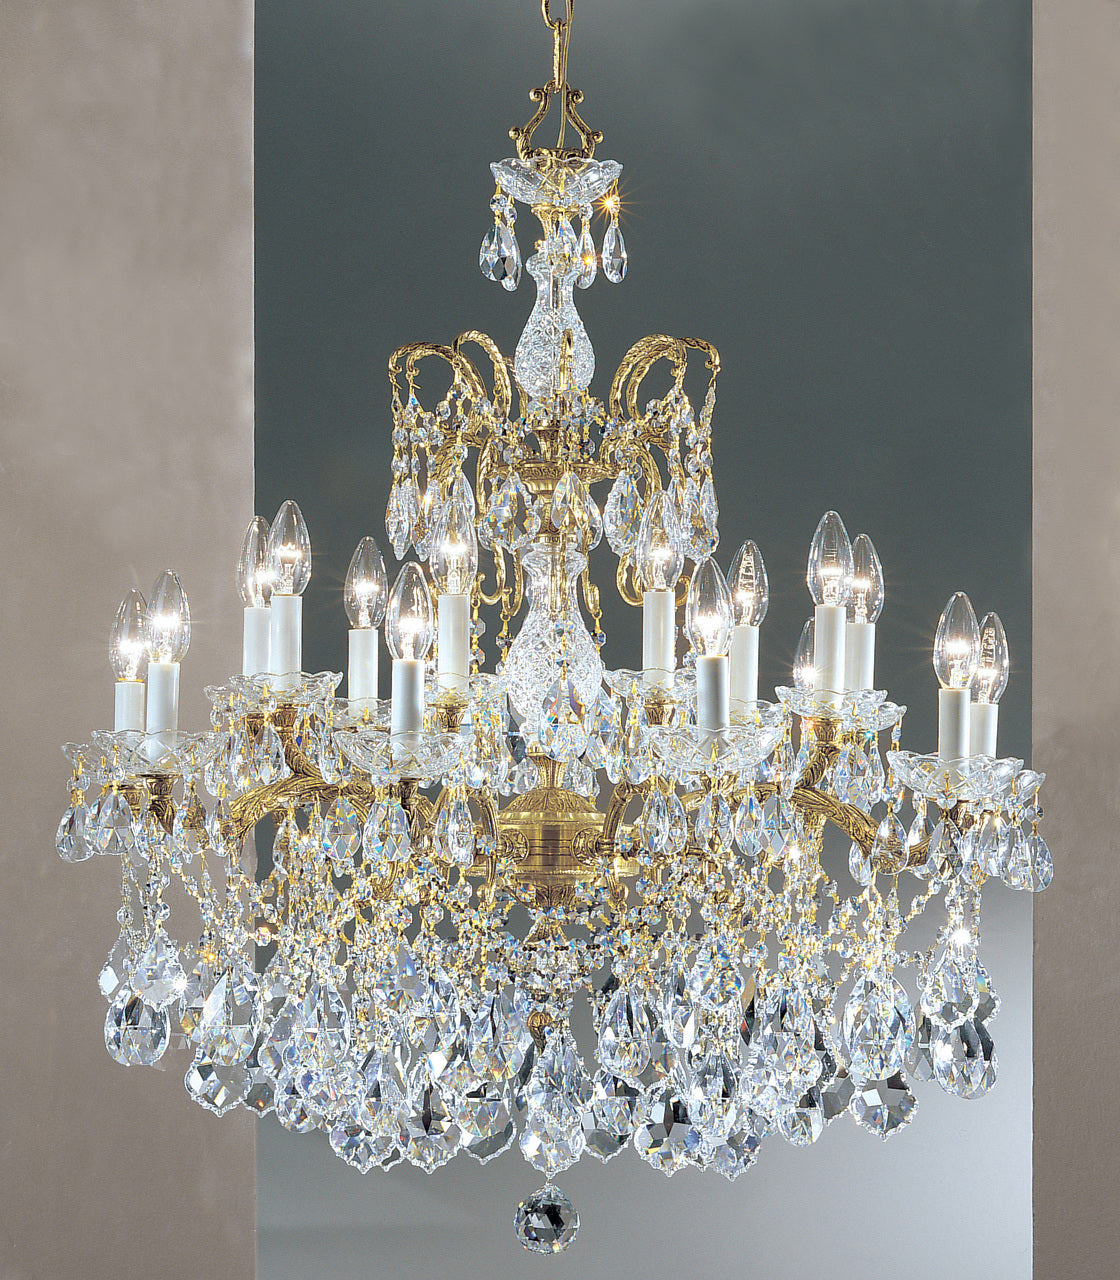 Classic Lighting 5548 OWB PAM Madrid Imperial Crystal/Cast Brass Chandelier in Olde World Bronze (Imported from Spain)